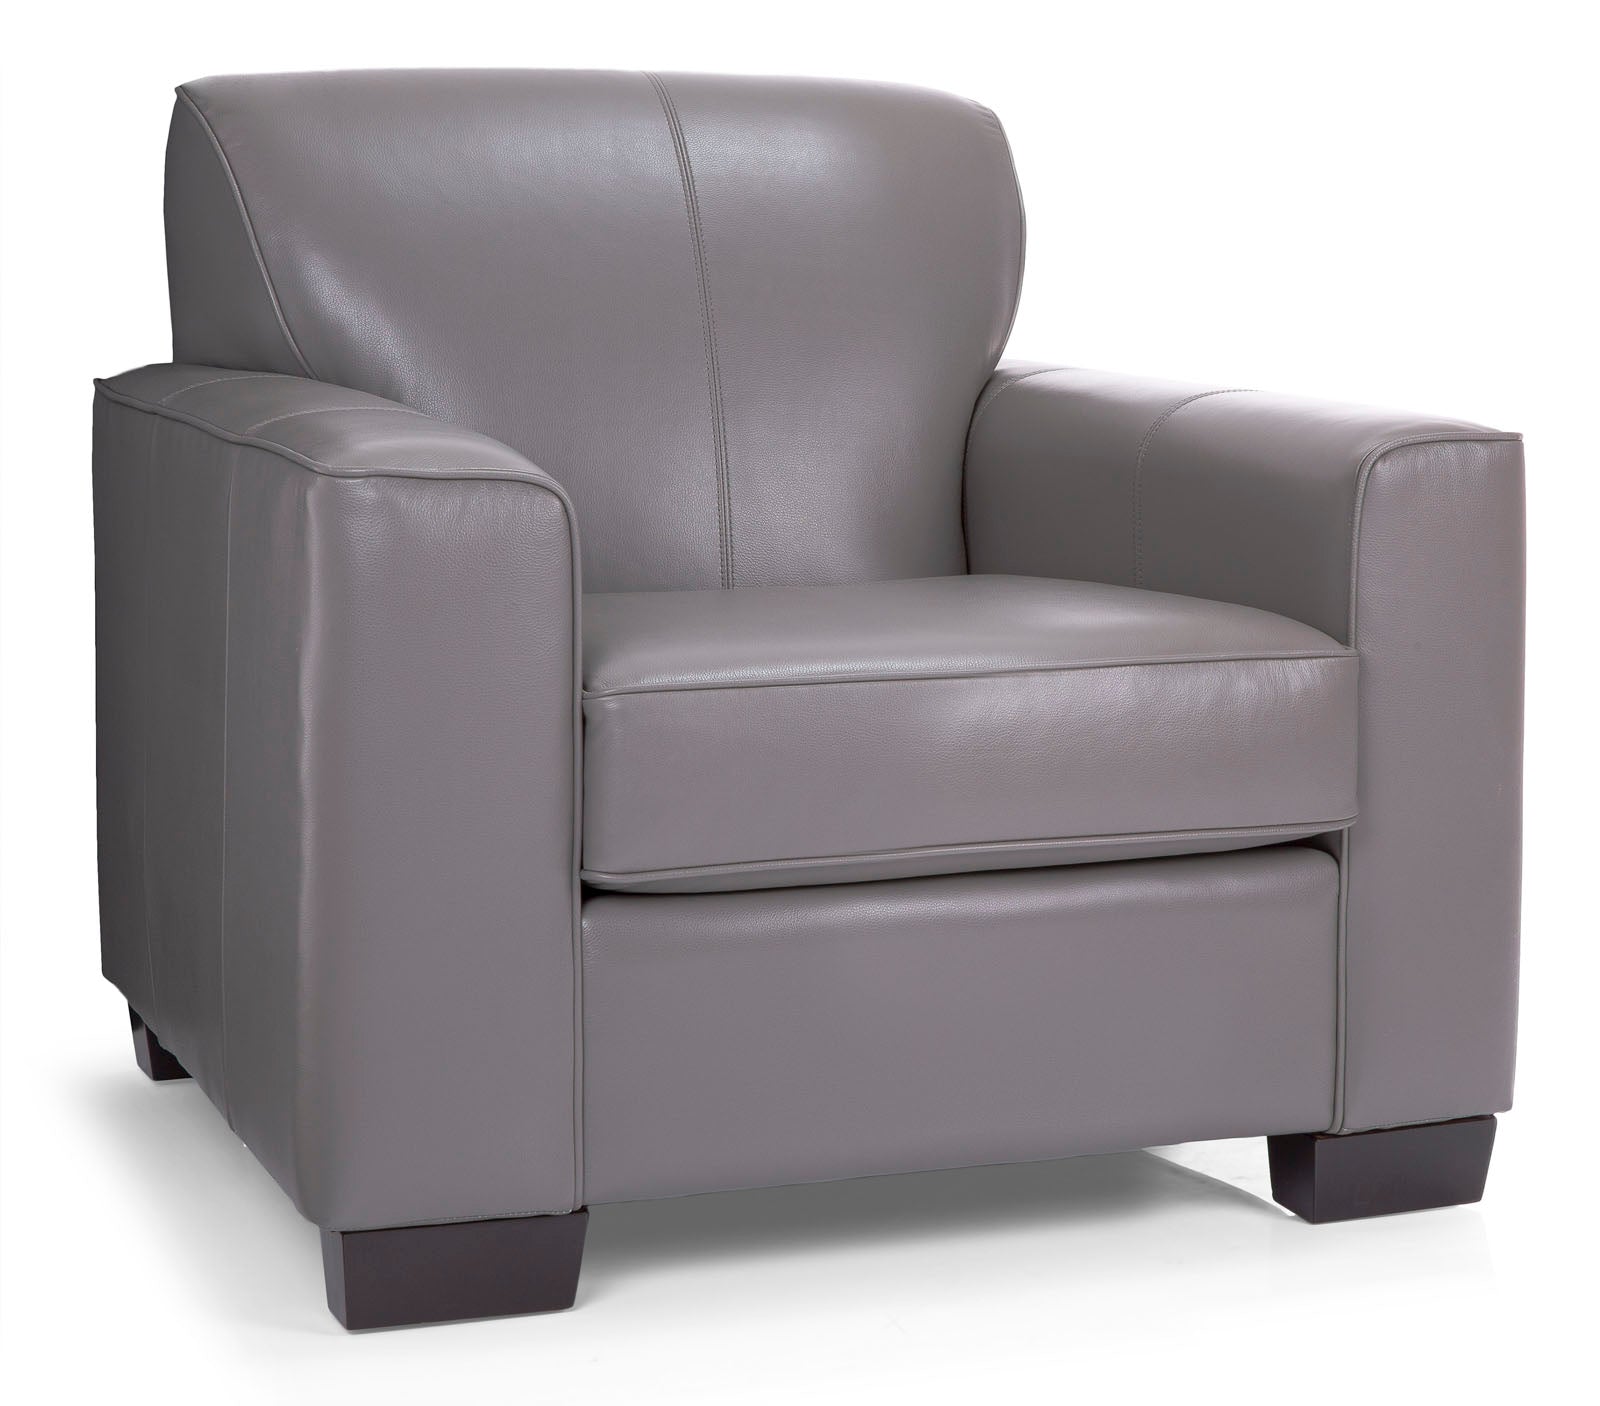 Lotus Leather Chair - MJM Furniture